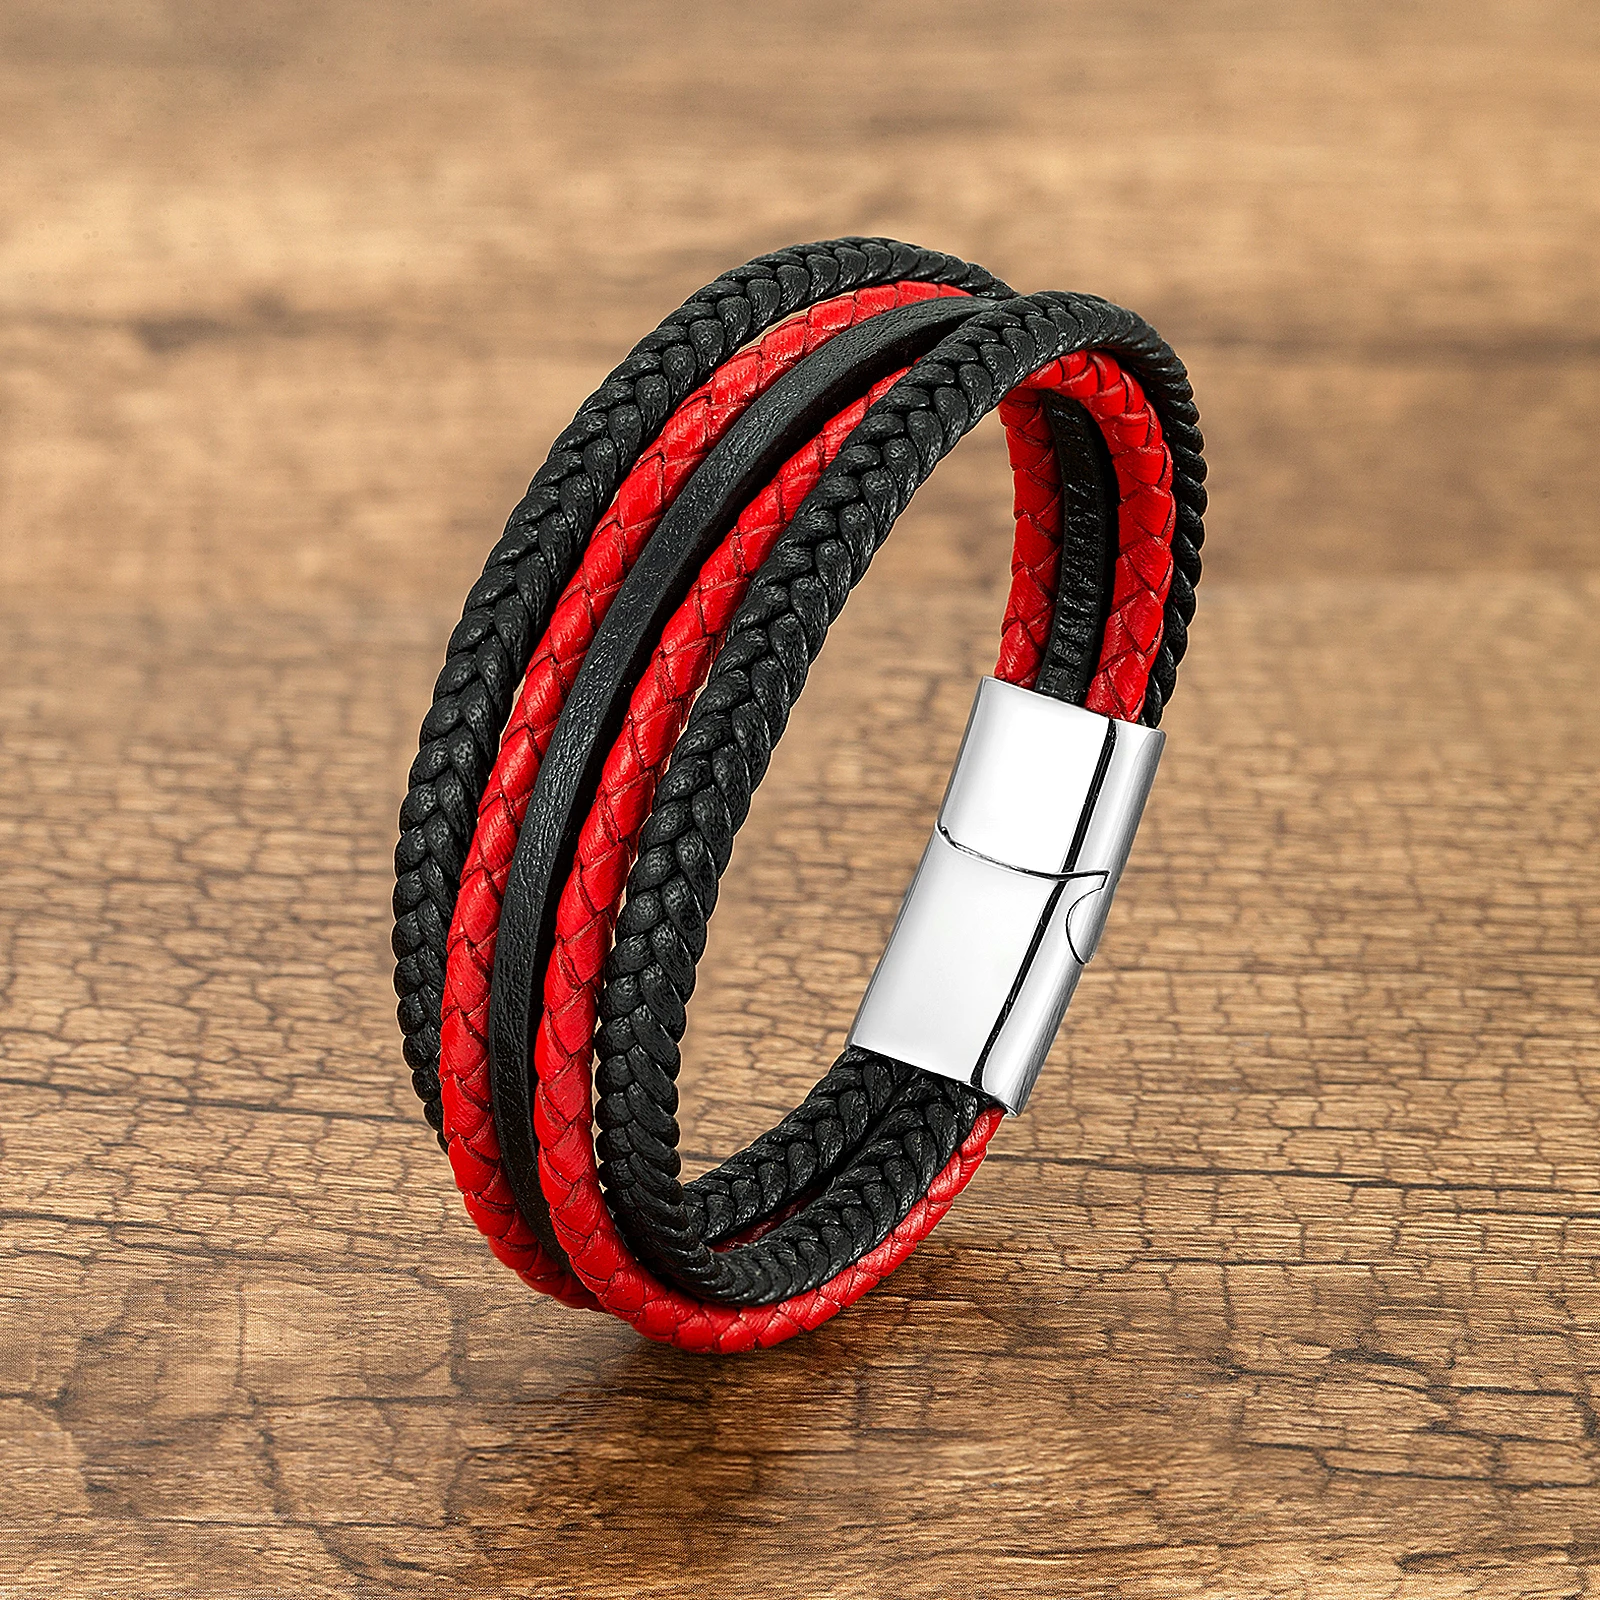 Black Red Multilayer Hand-Woven Leather Wrap Bracelets Vintage Style Charm Men's Bracelets & Bangles Male Gift Wristband Jewelry